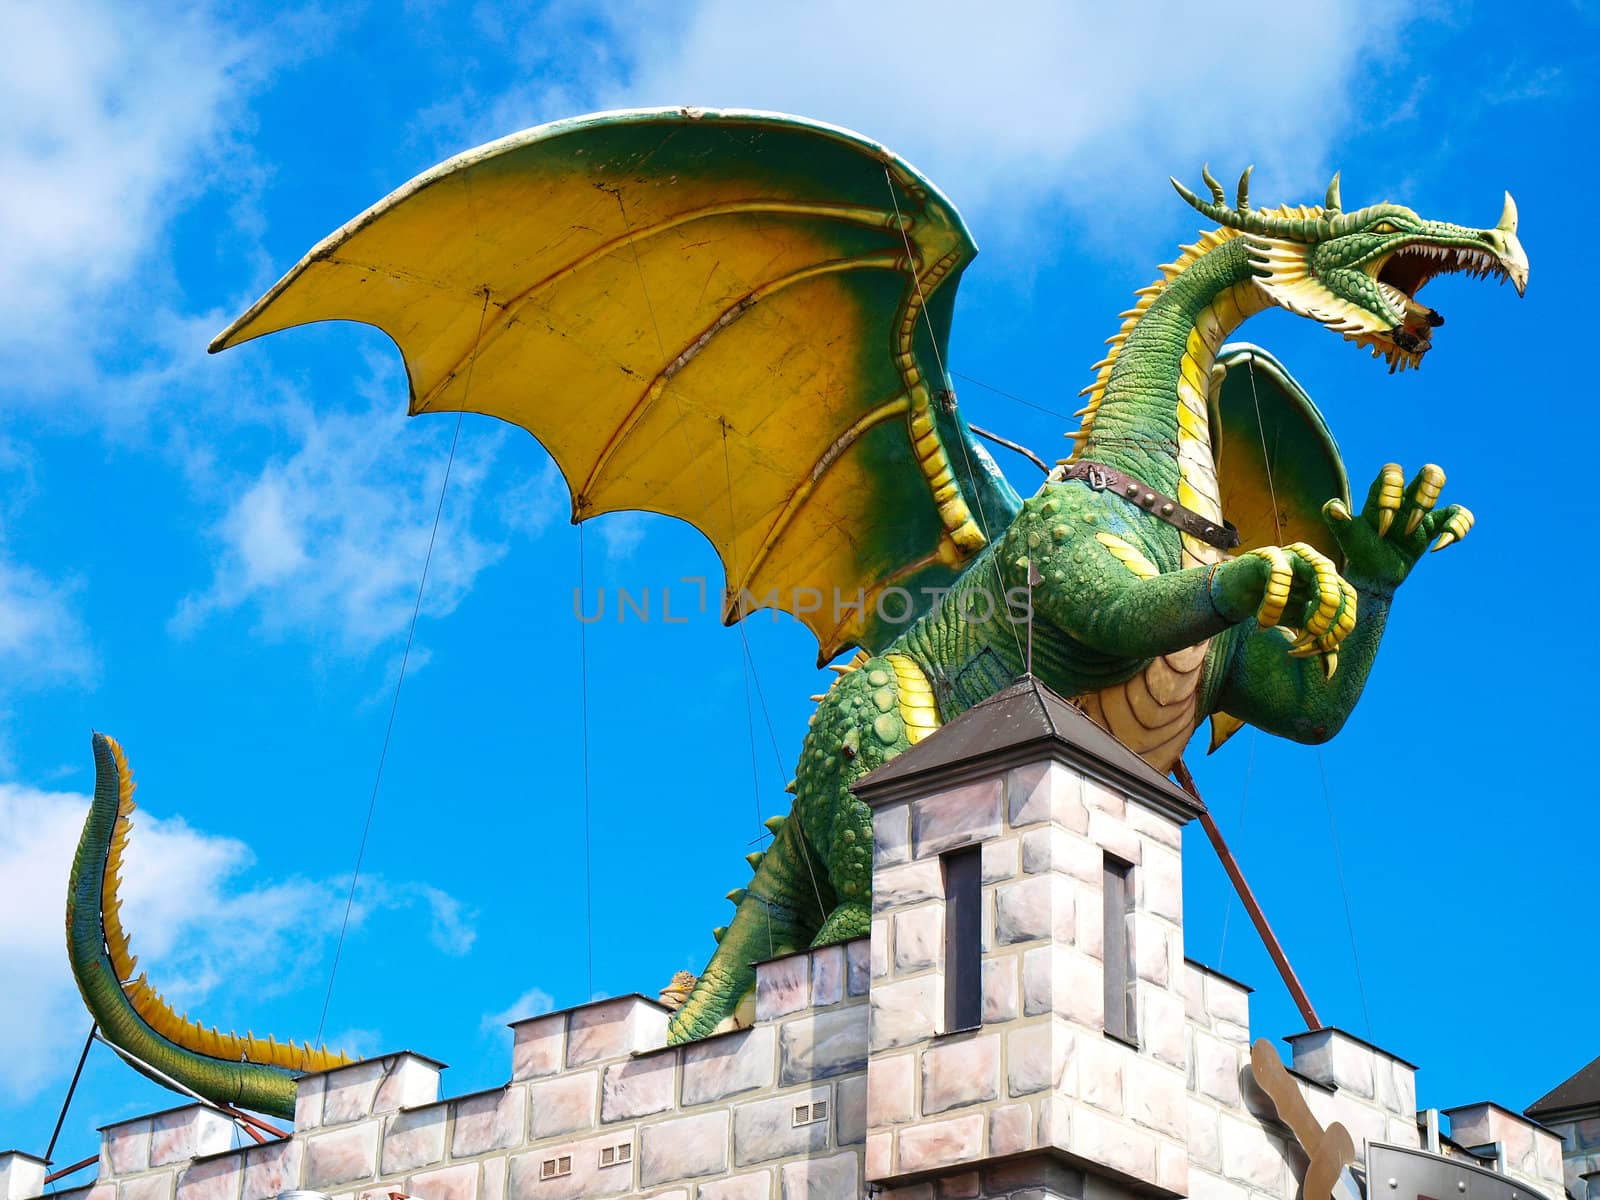 model of a dragon on the roof of the house